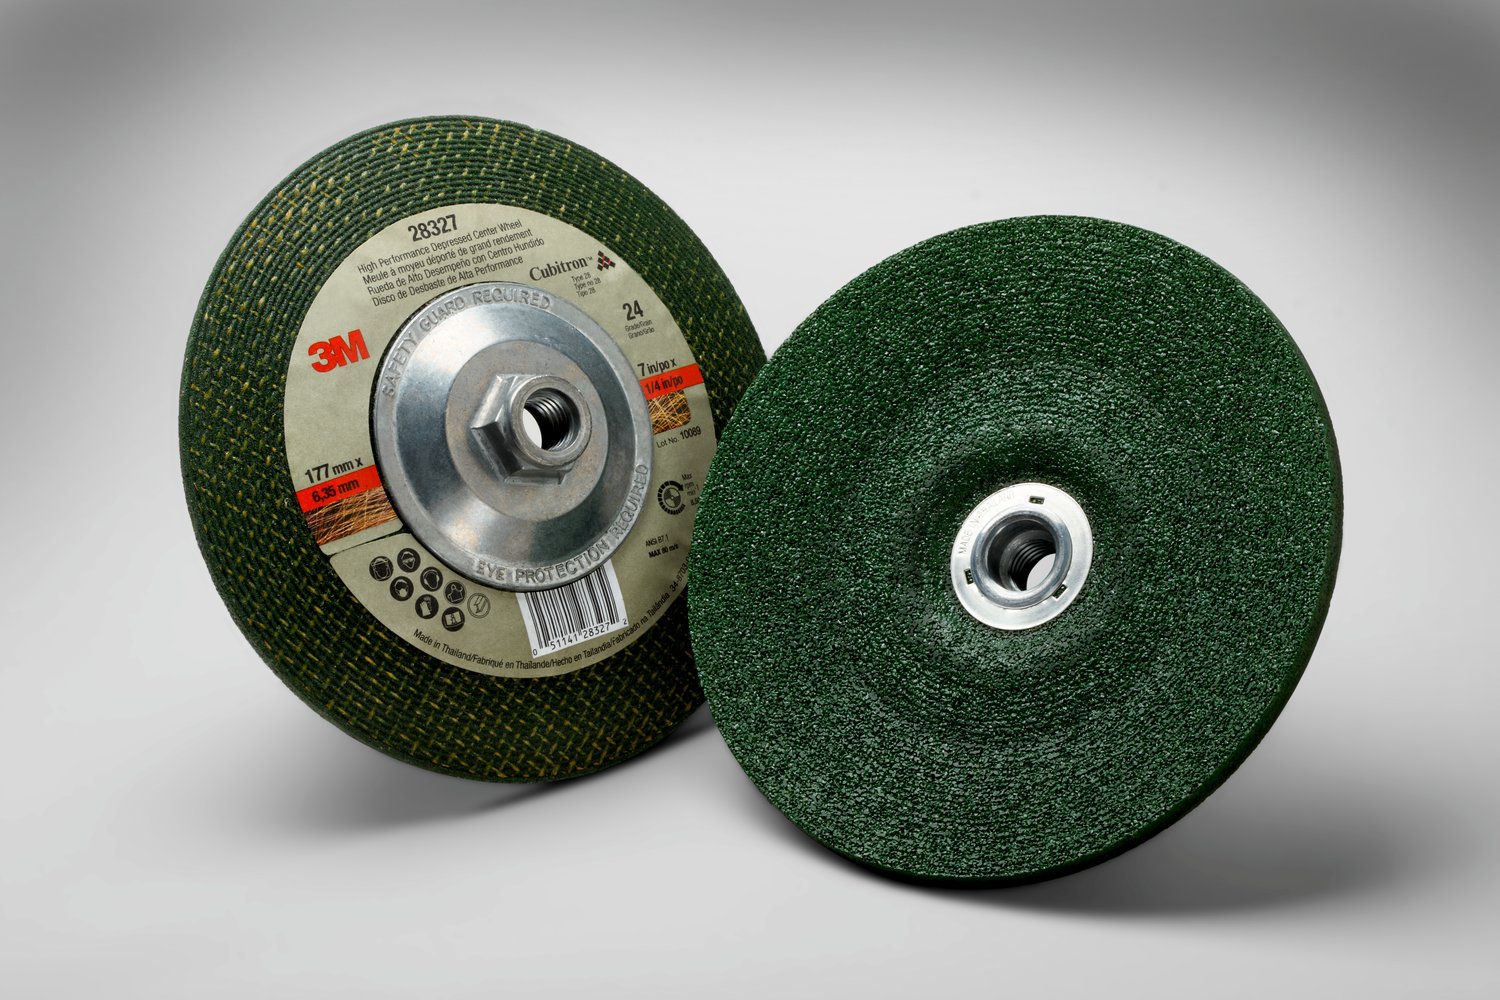 7100123075 - 3M Green Corps Depressed Center Grinding Wheel, T27, 36, 7 in x 1/4 in
x 5/8 in-11 Internal, 10/Carton, 20 ea/Case